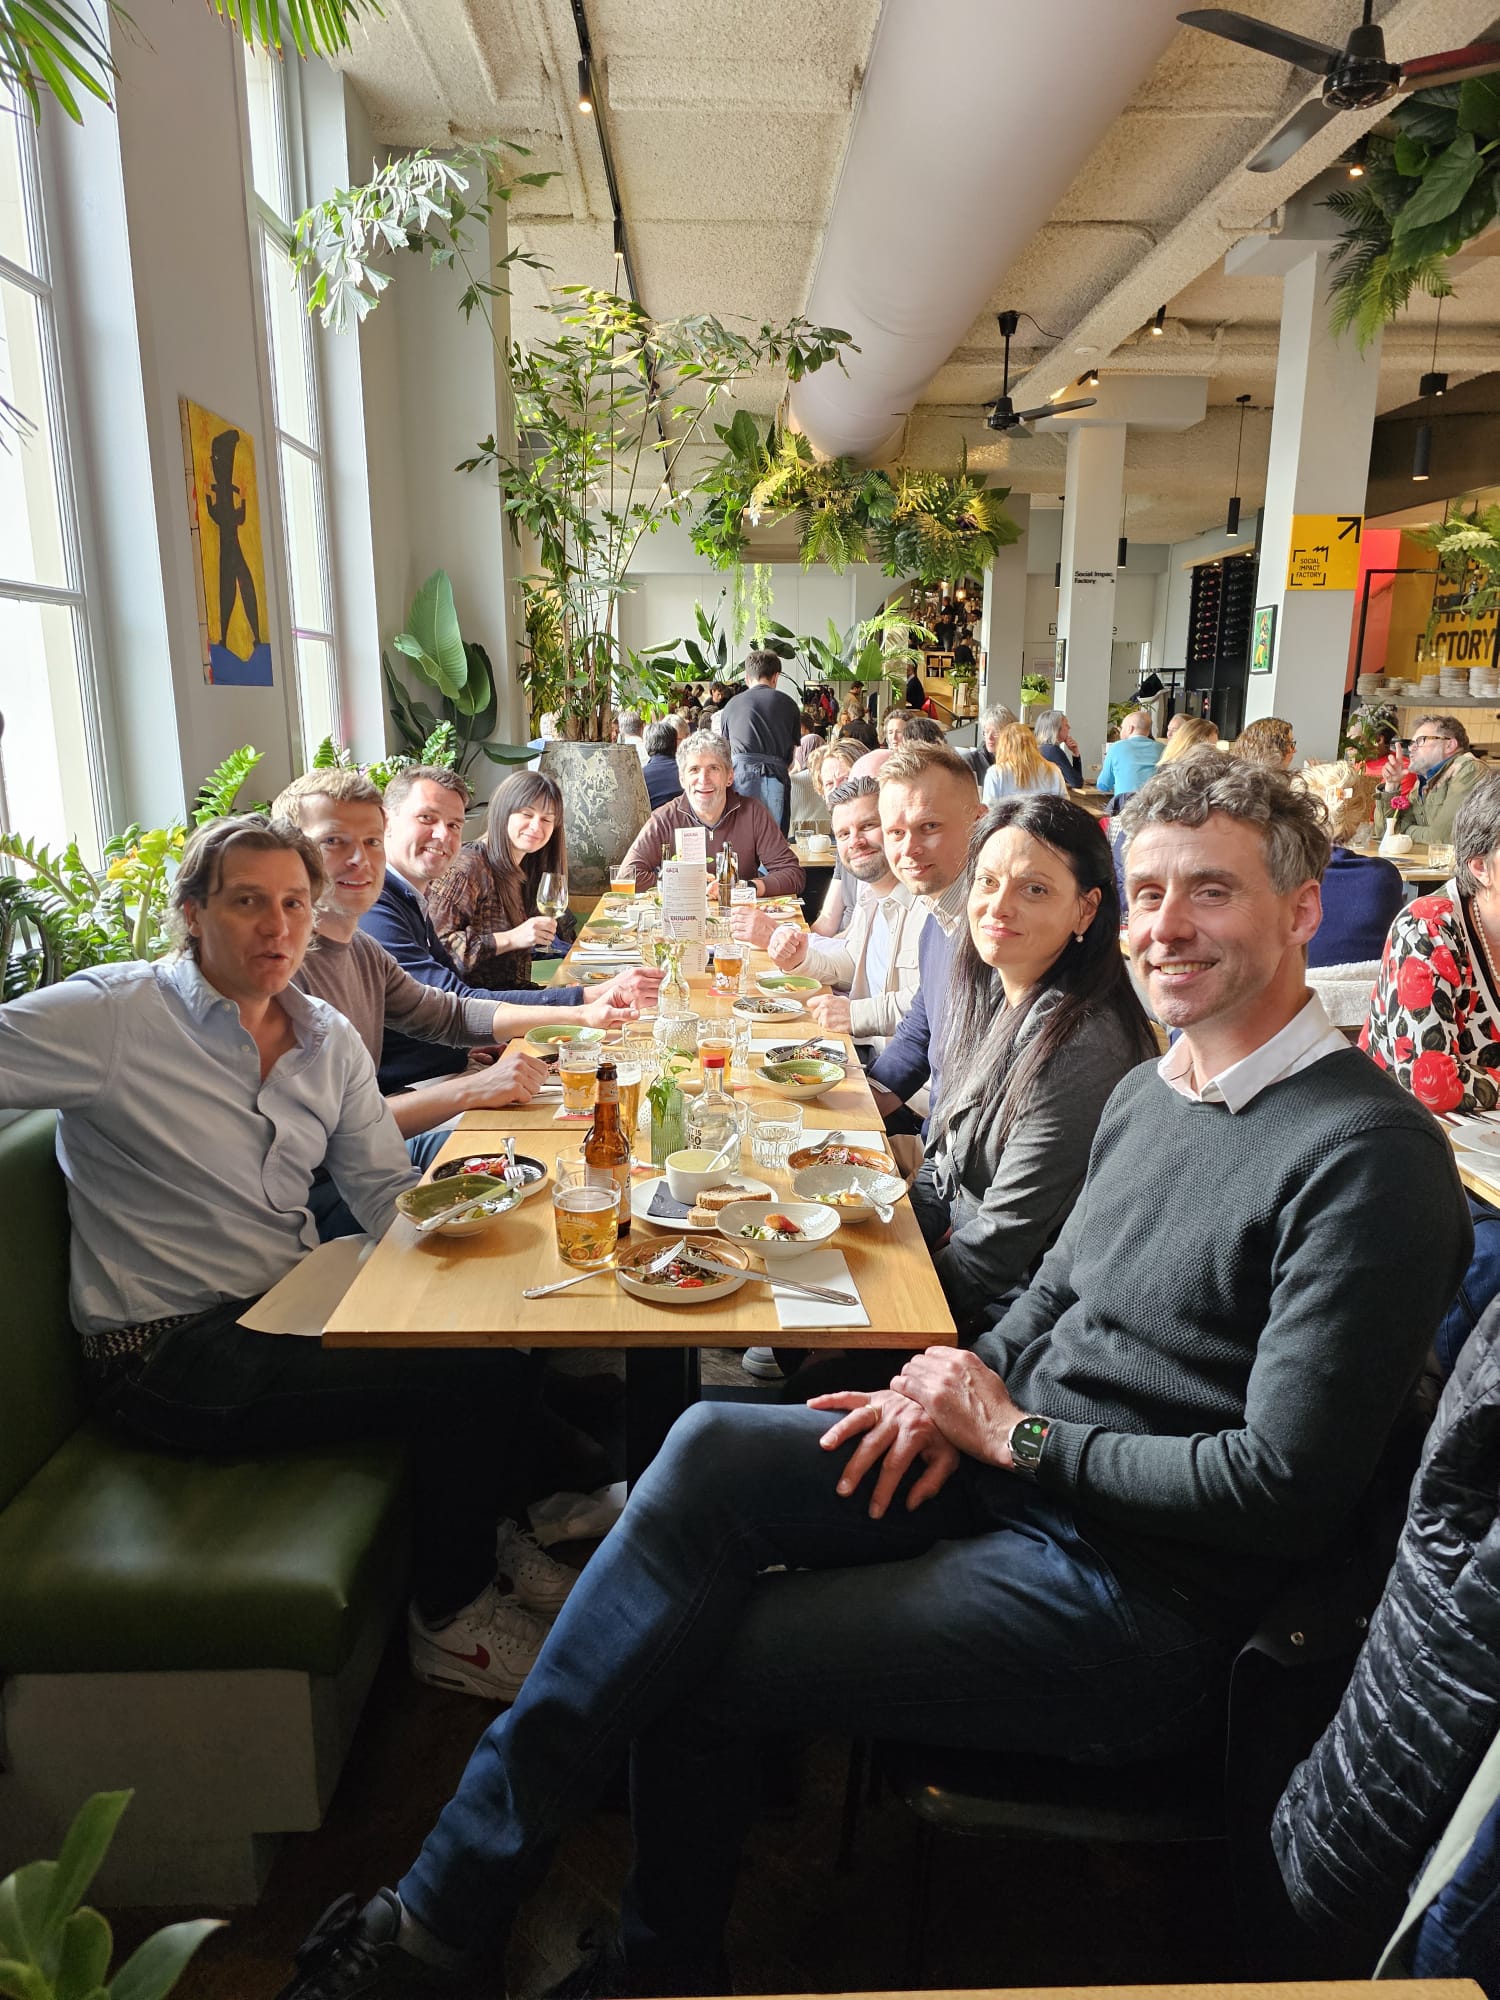 TreasurUp team gathers for lunch in their Utrecht, Netherlands office.